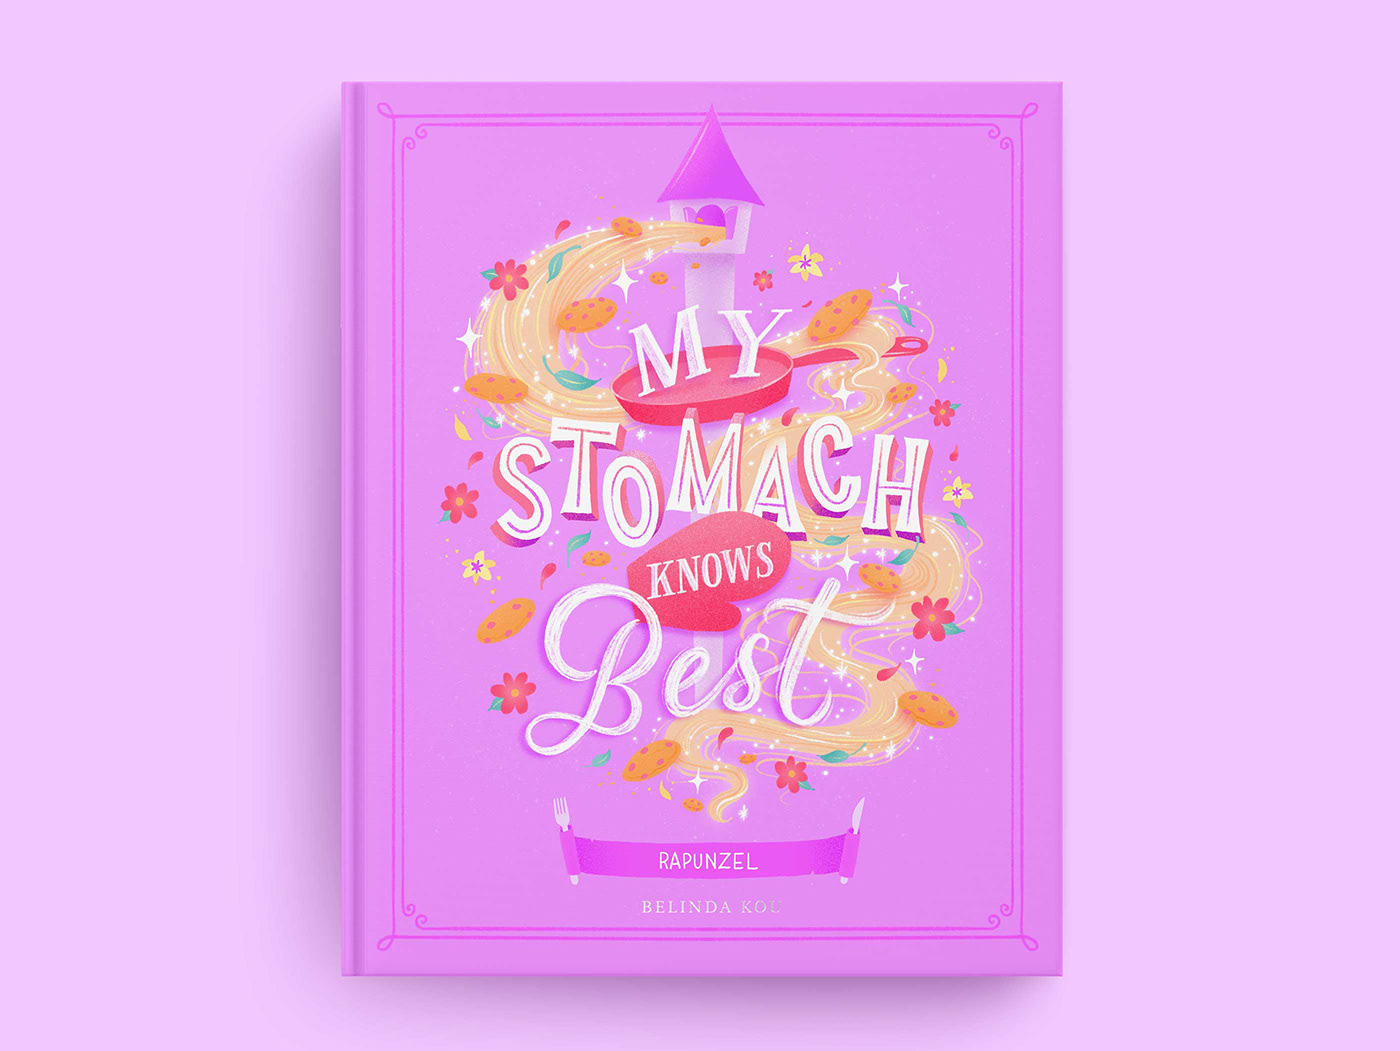 Rapunzel book cover art featuring hand lettering and illustrations of fairy tale and food art